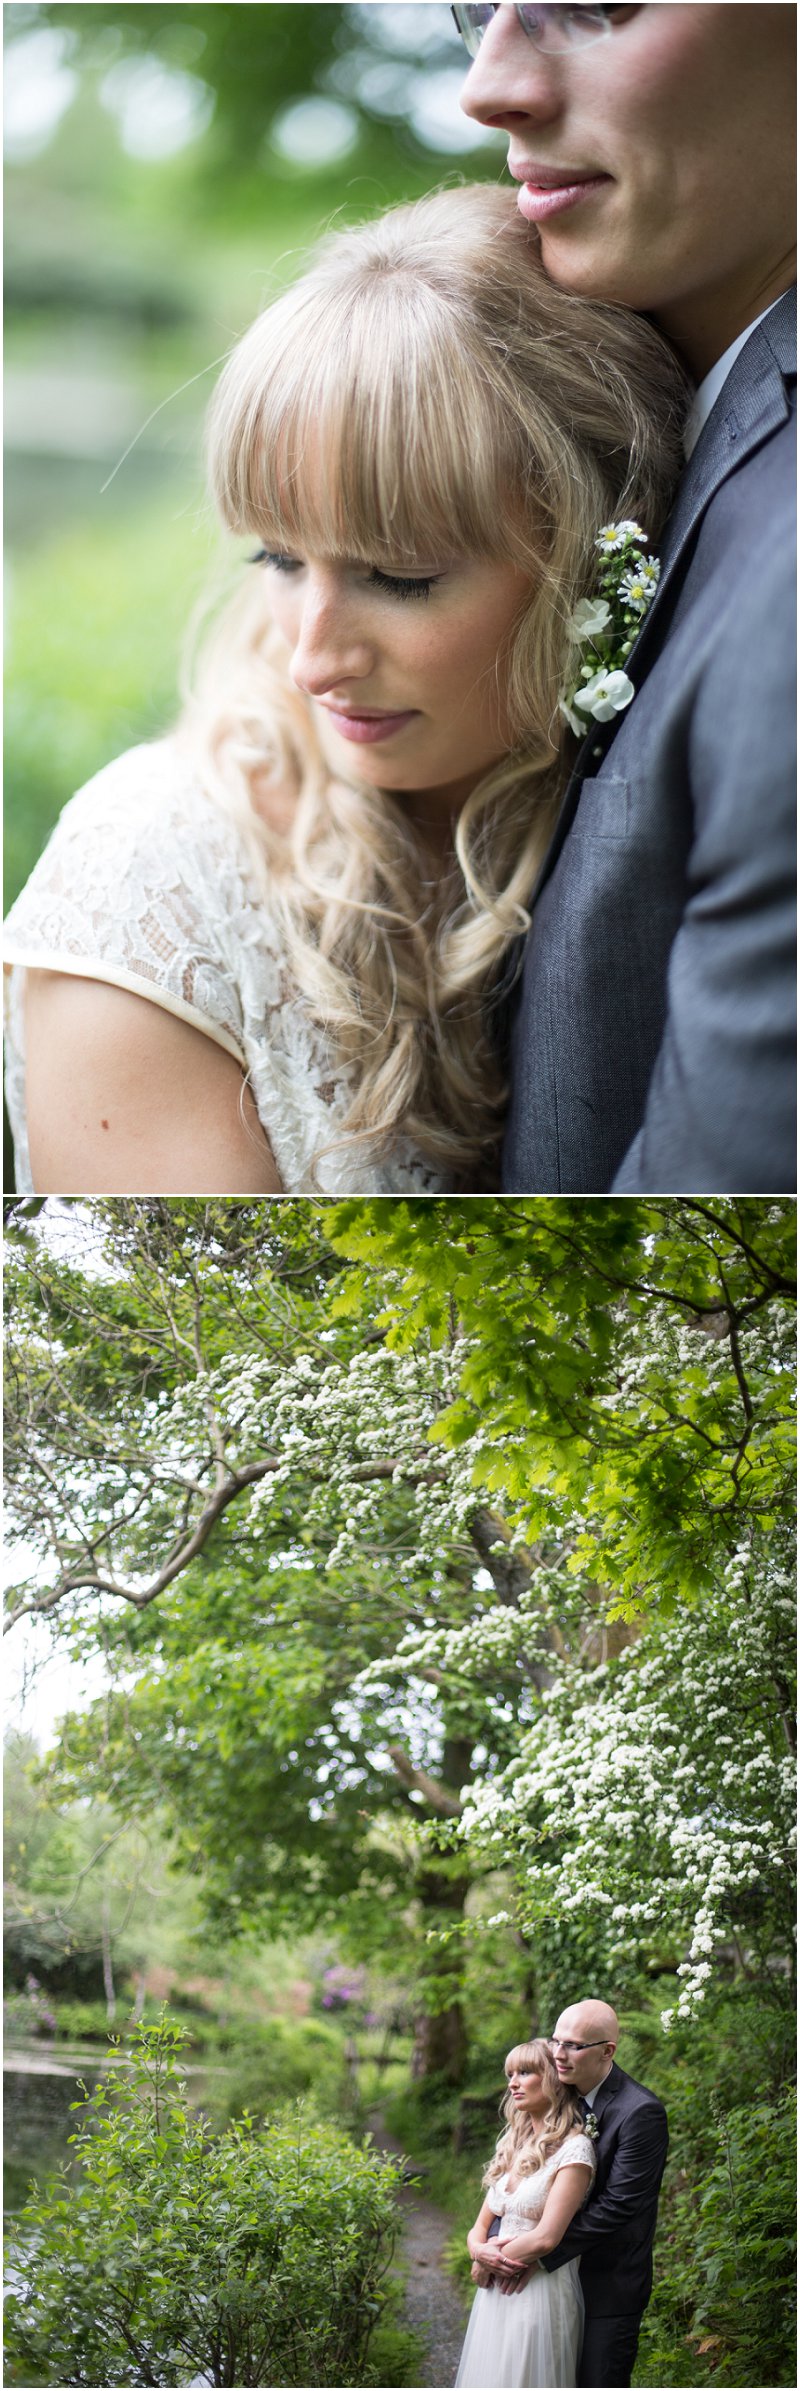 Bride and Groom at Linthwaite House Hotel Cumbria Photography